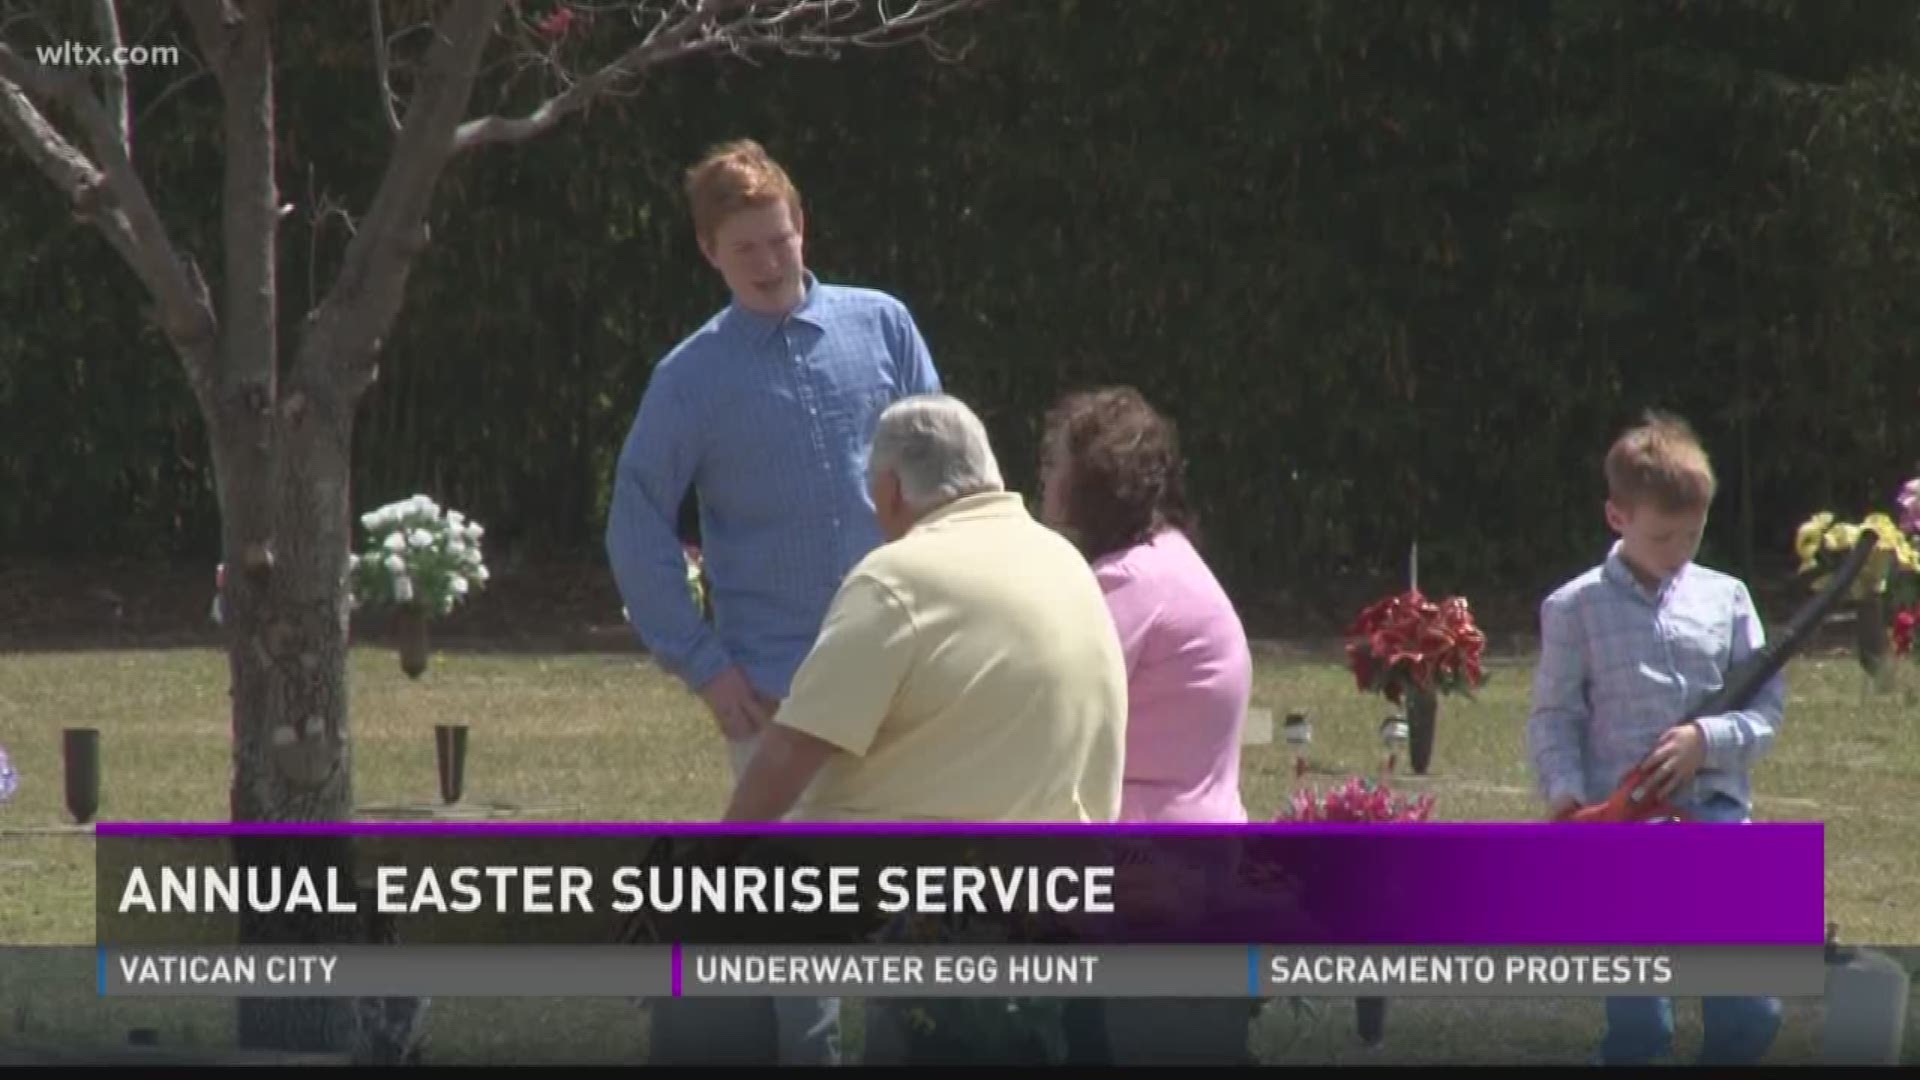 Greenlawn Memorial Park held its annual Easter sunrise service on Sunday.